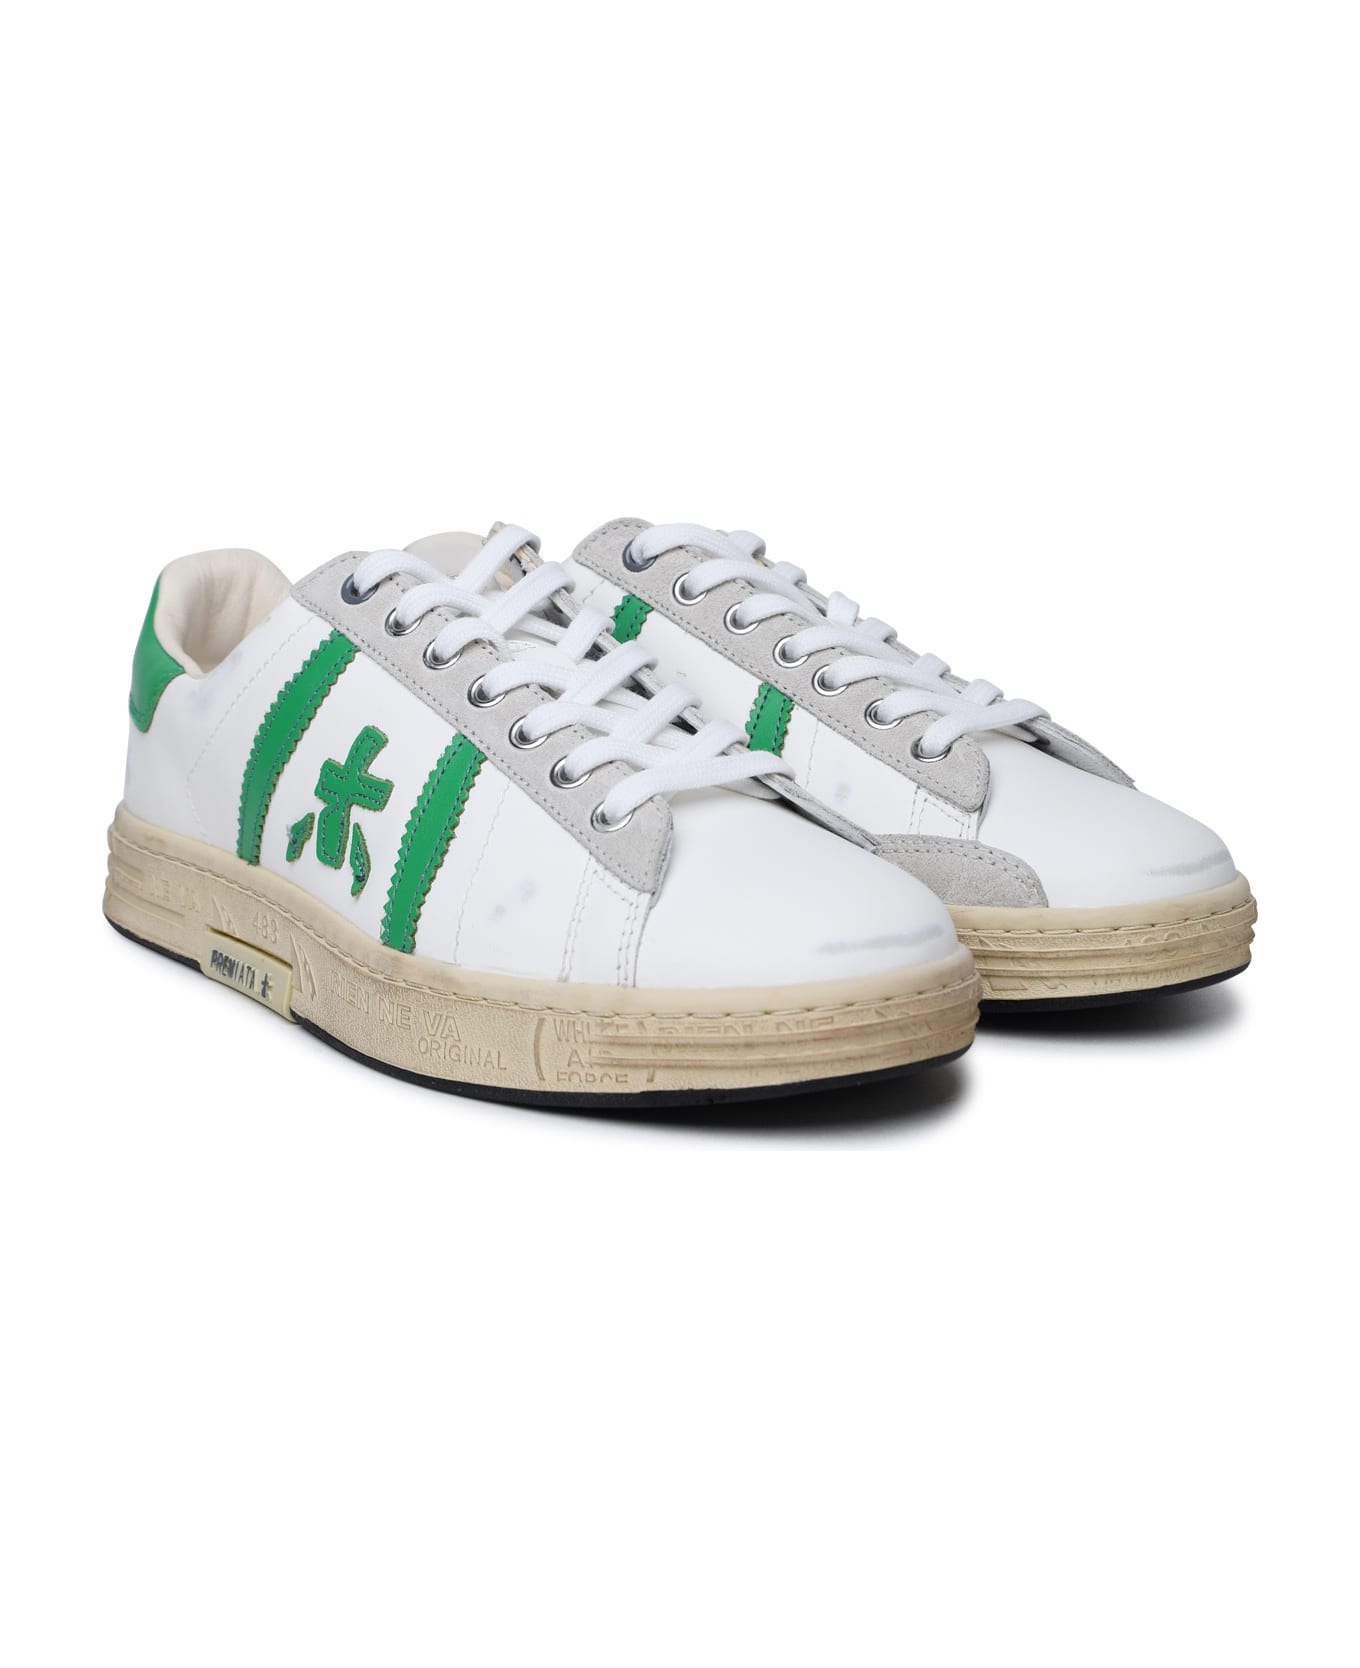 Premiata 'russell' White Leather Sneakers - White